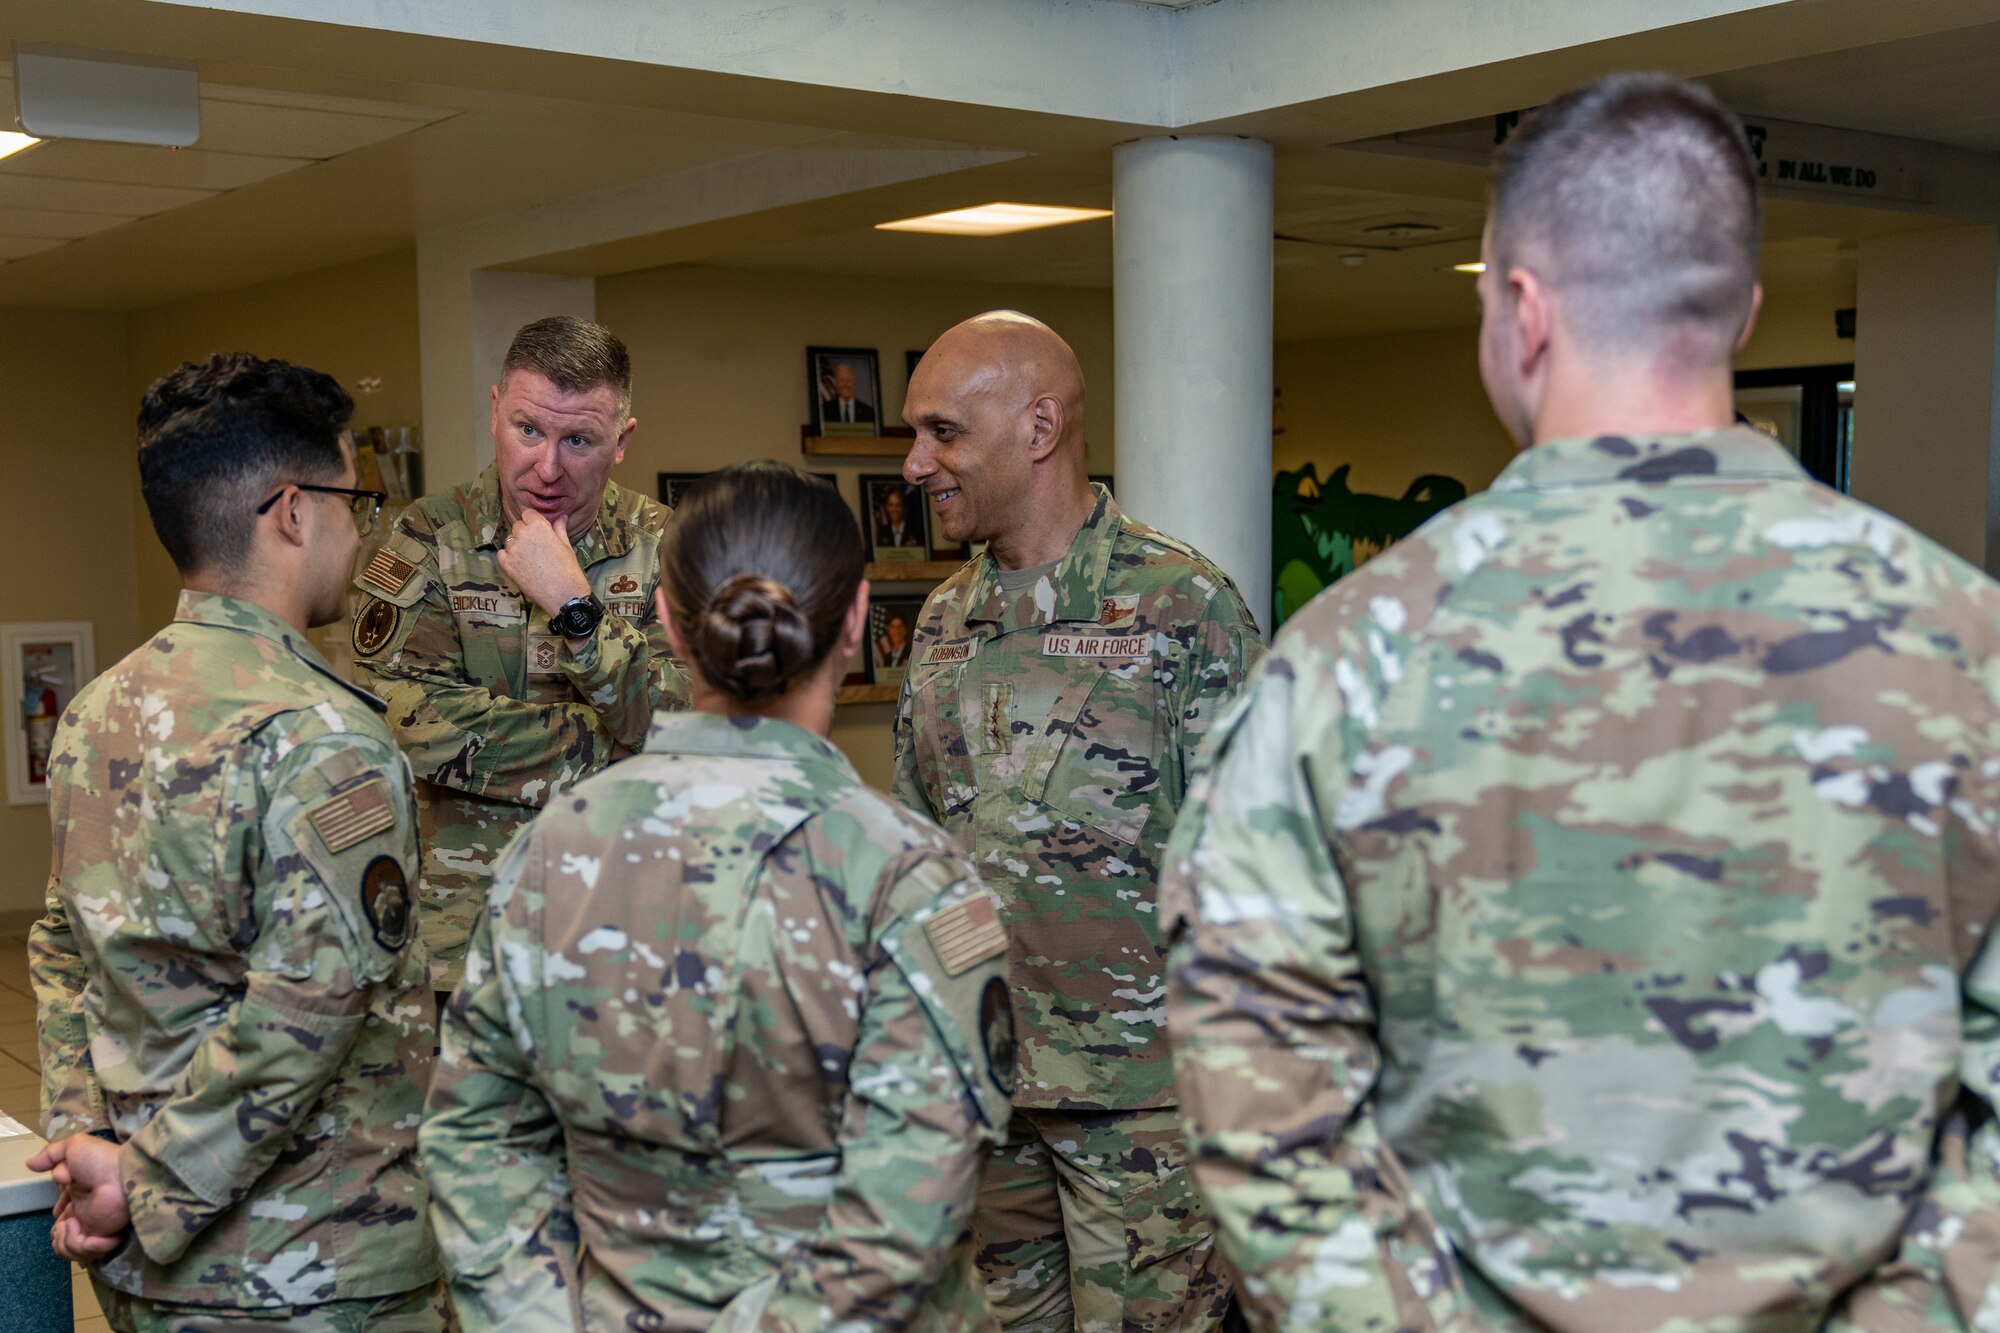 U.S. Air Force Lt. Gen. Brian Robinson, commander of Air Education and Training Command, and Chief Master Sgt. Chad Bickley, AETC command chief, speaks with Airmen in the 334th Training Squadron dormitory at Keesler Air Force Base